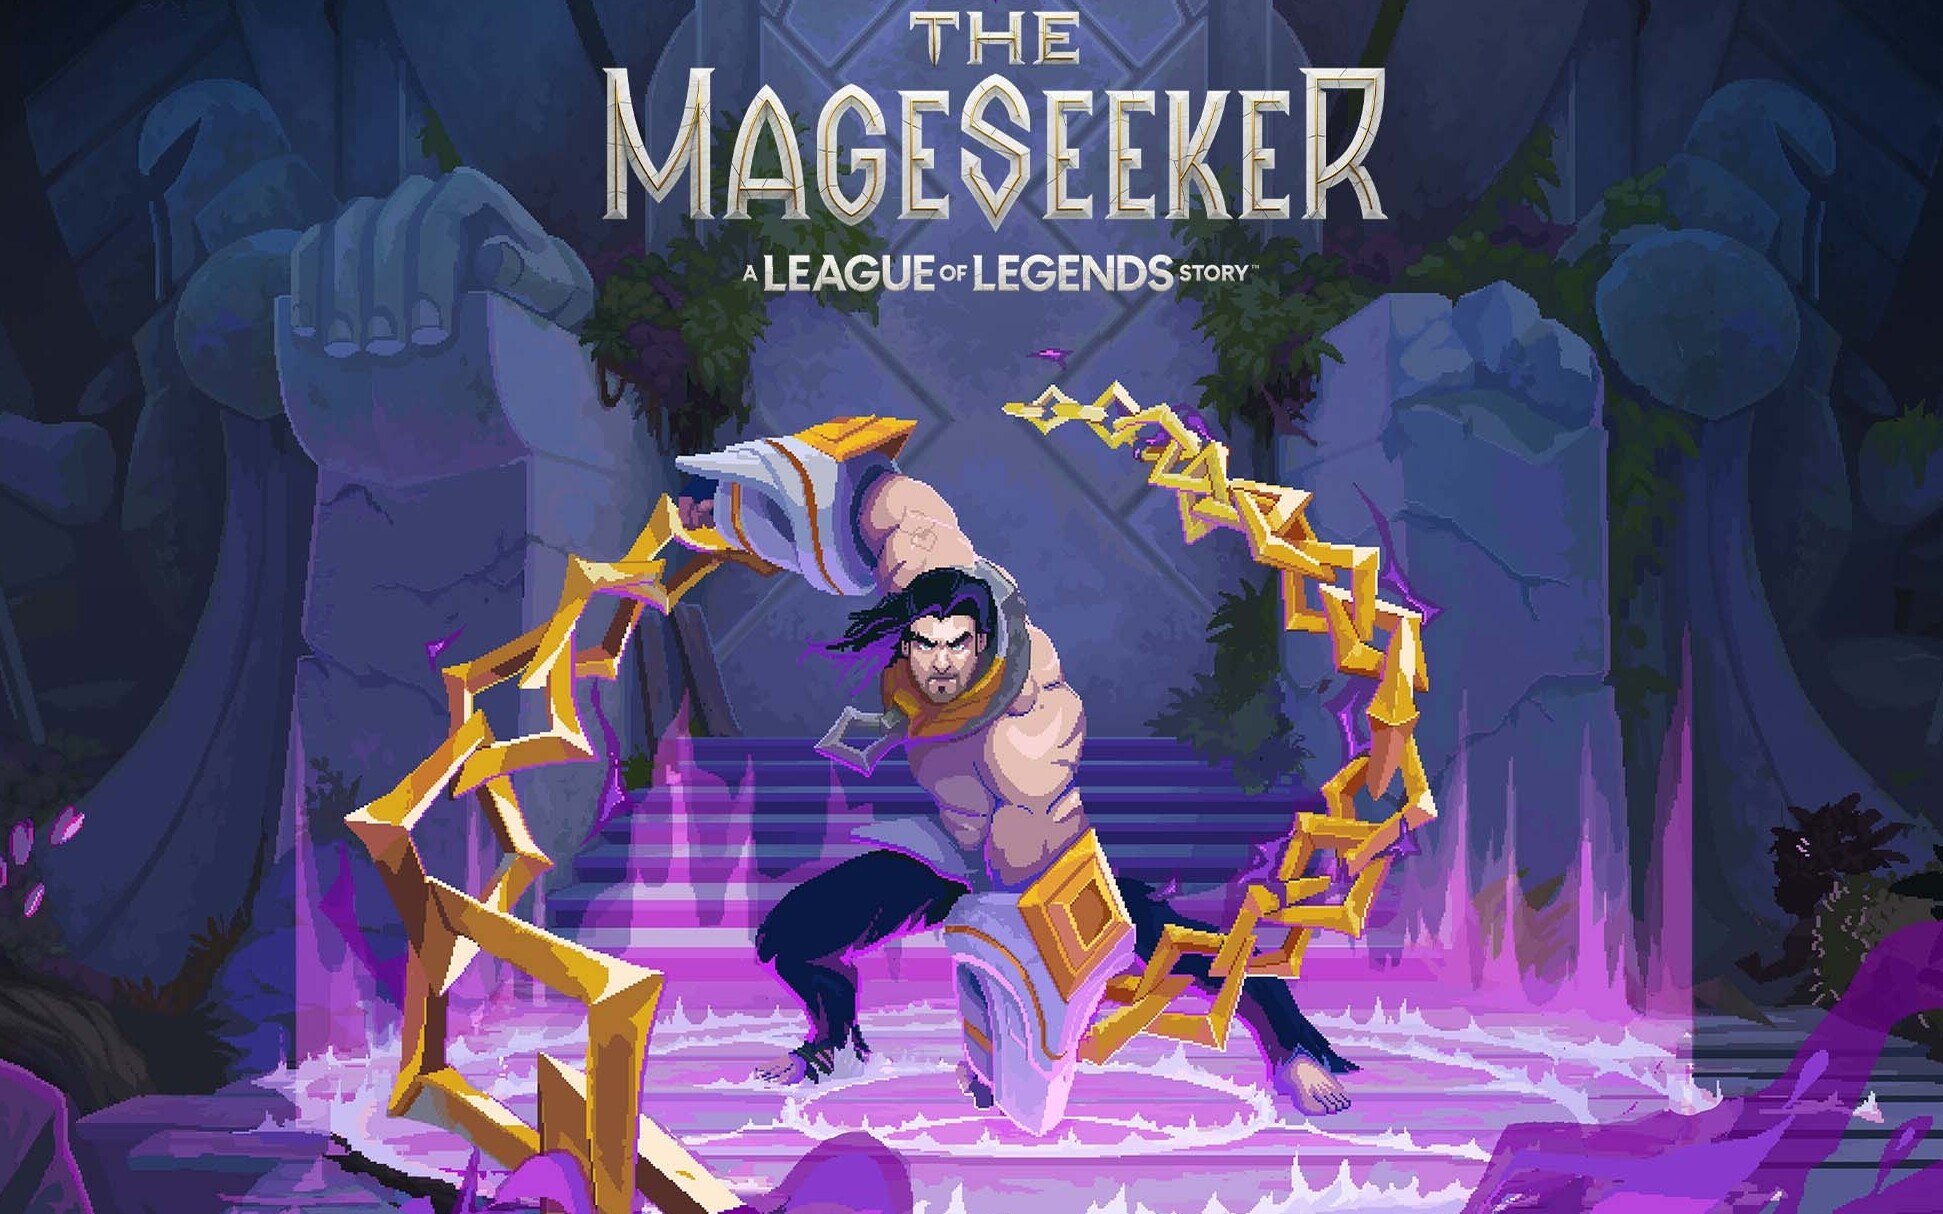 The MAgeseeker